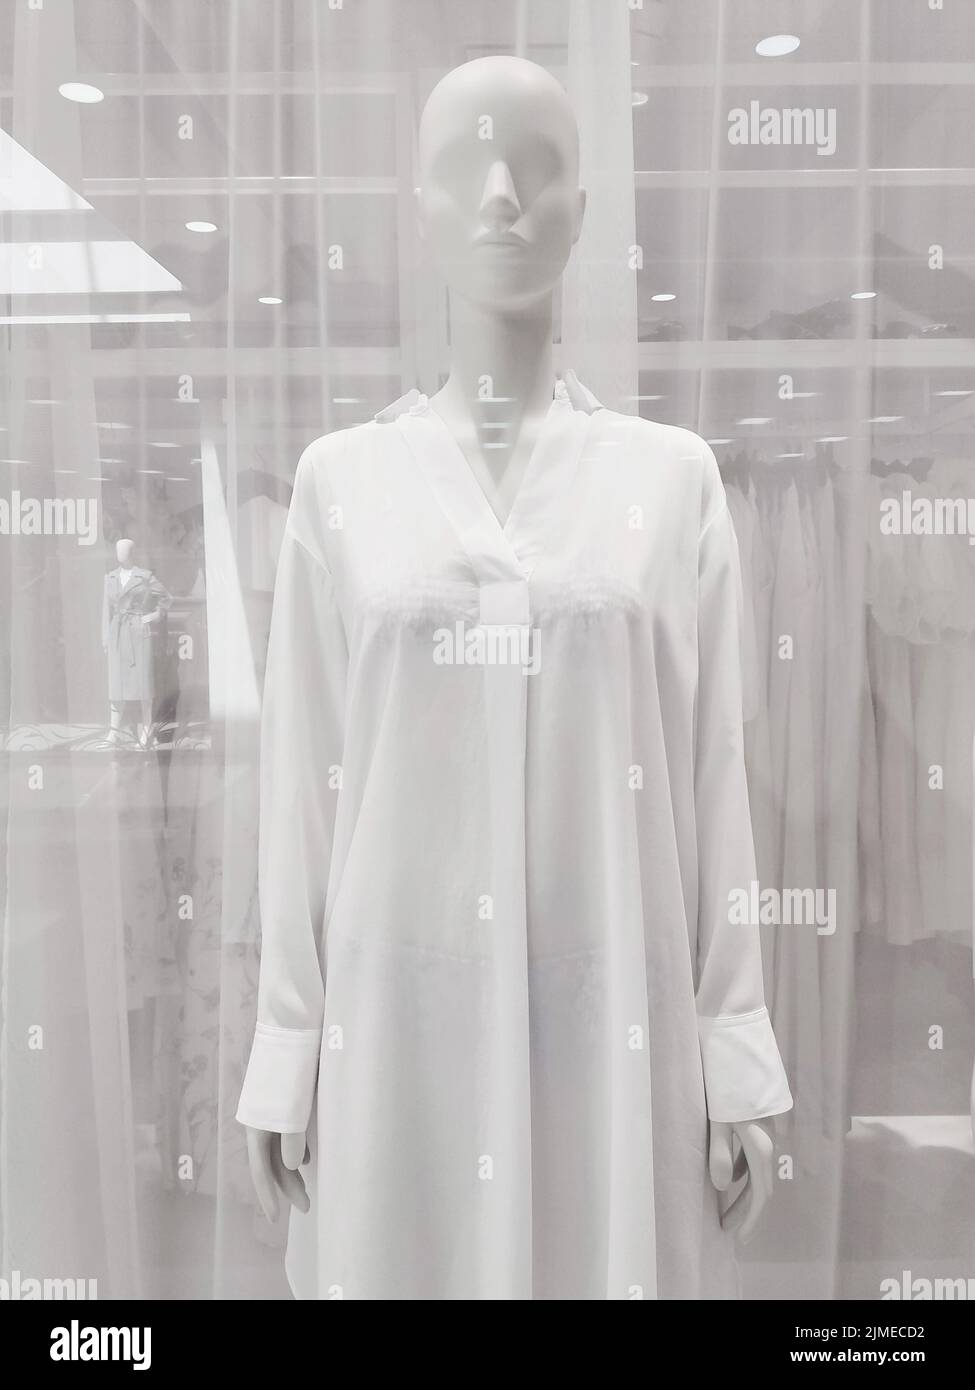 Clothing store window, mannequin in white shirt Stock Photo